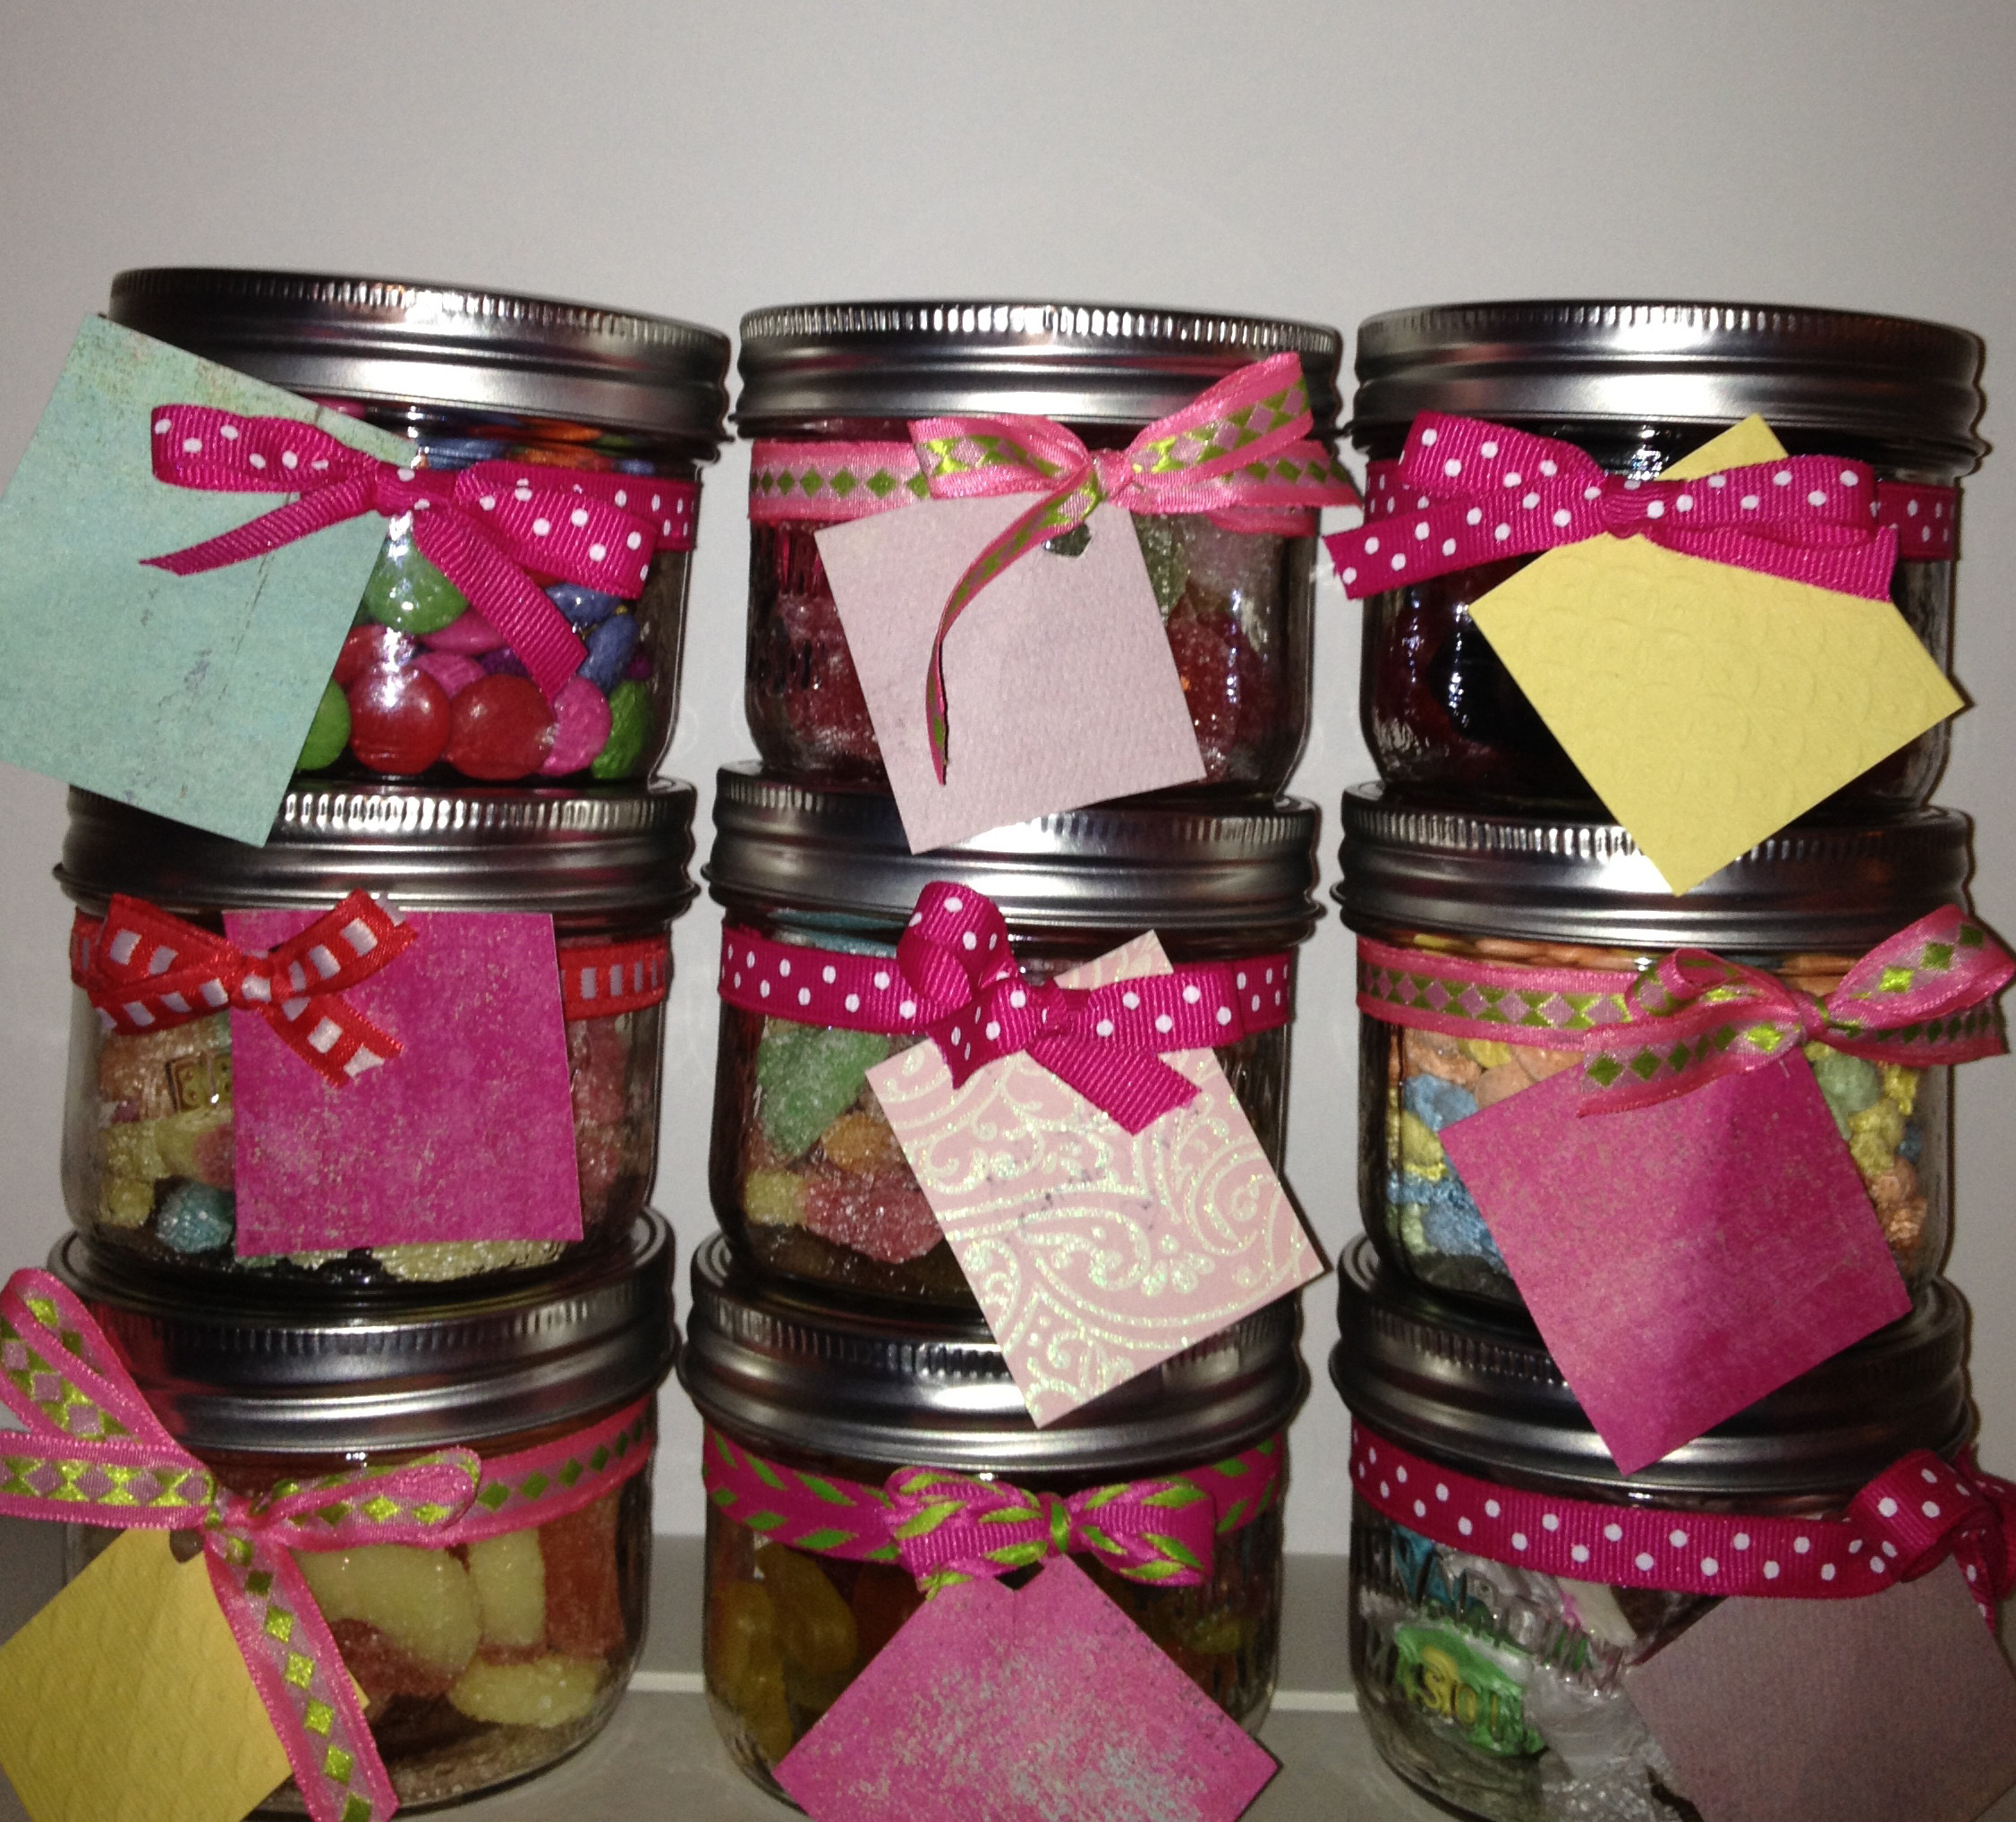 Mason Jar Gift Ideas For Baby Shower
 Need a baby shower favor idea – this is happy hour